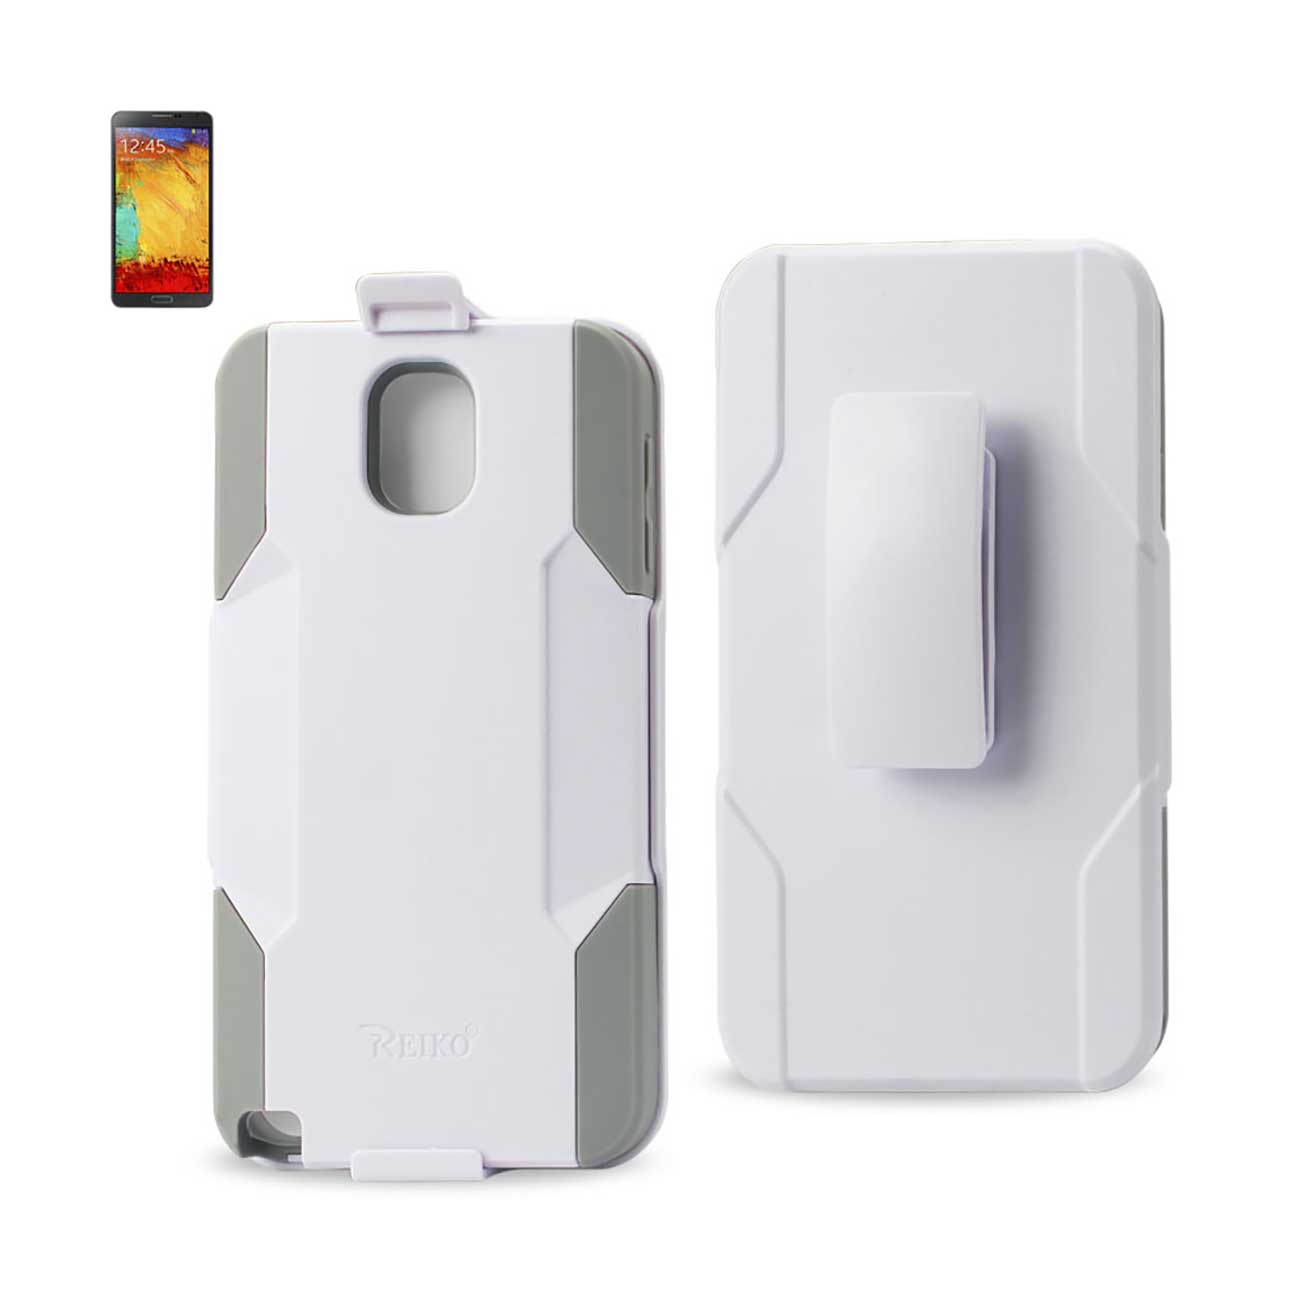 Reiko Samsung Galaxy Note 3 3-In-1 Hybrid Heavy Duty Holster Combo Case In Gray White